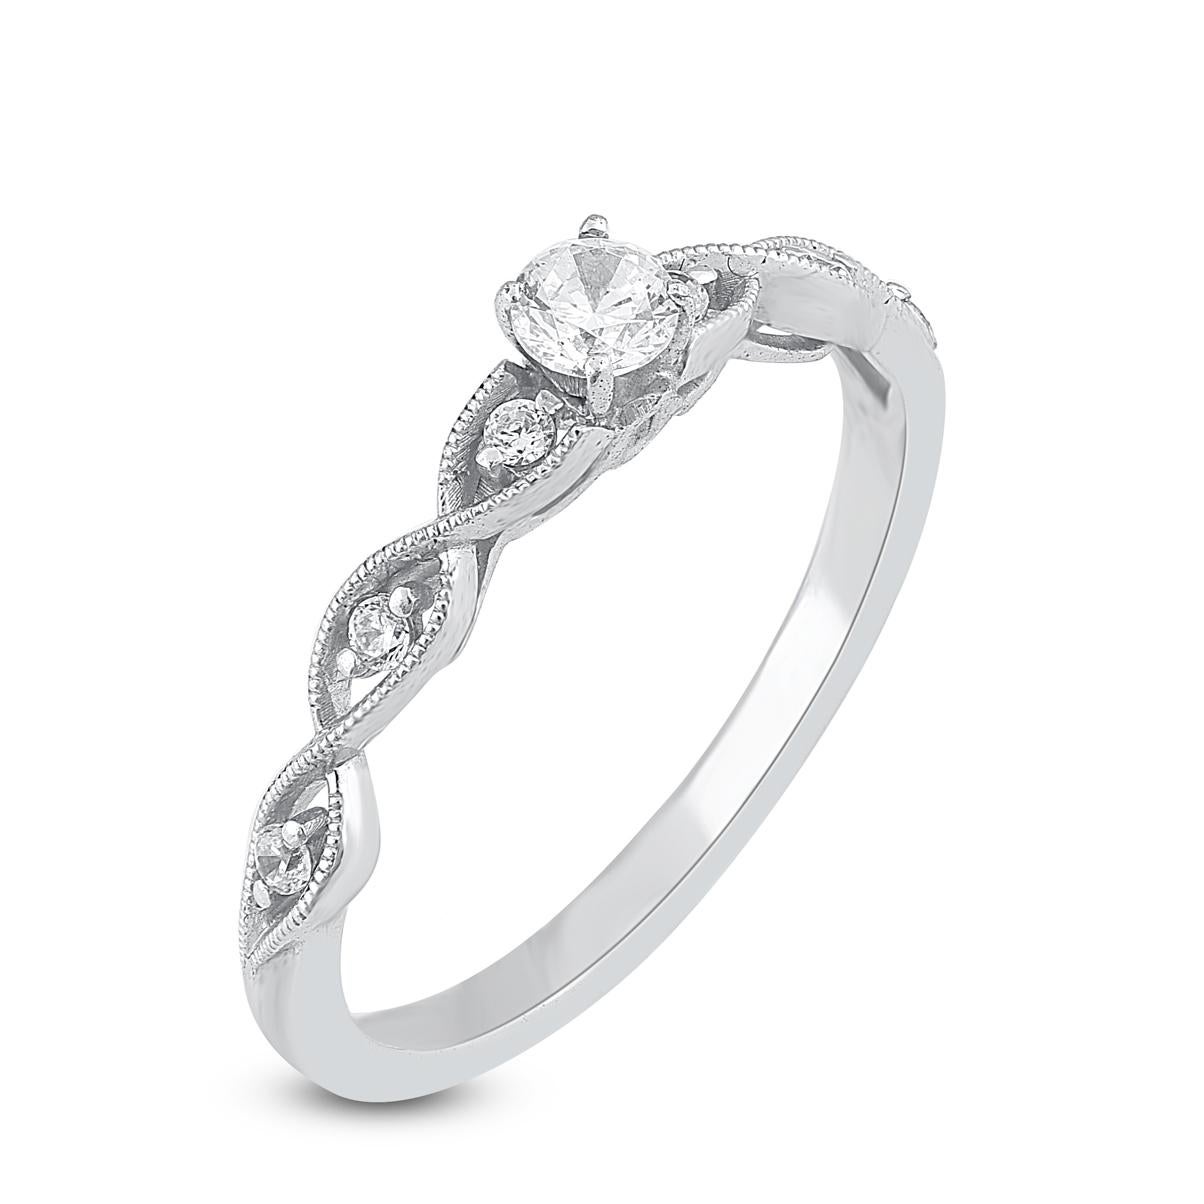 Contemporary TJD 0.25 Carat Brilliant Cut Diamond 14KT White Gold Solitaire Engagement Ring For Sale